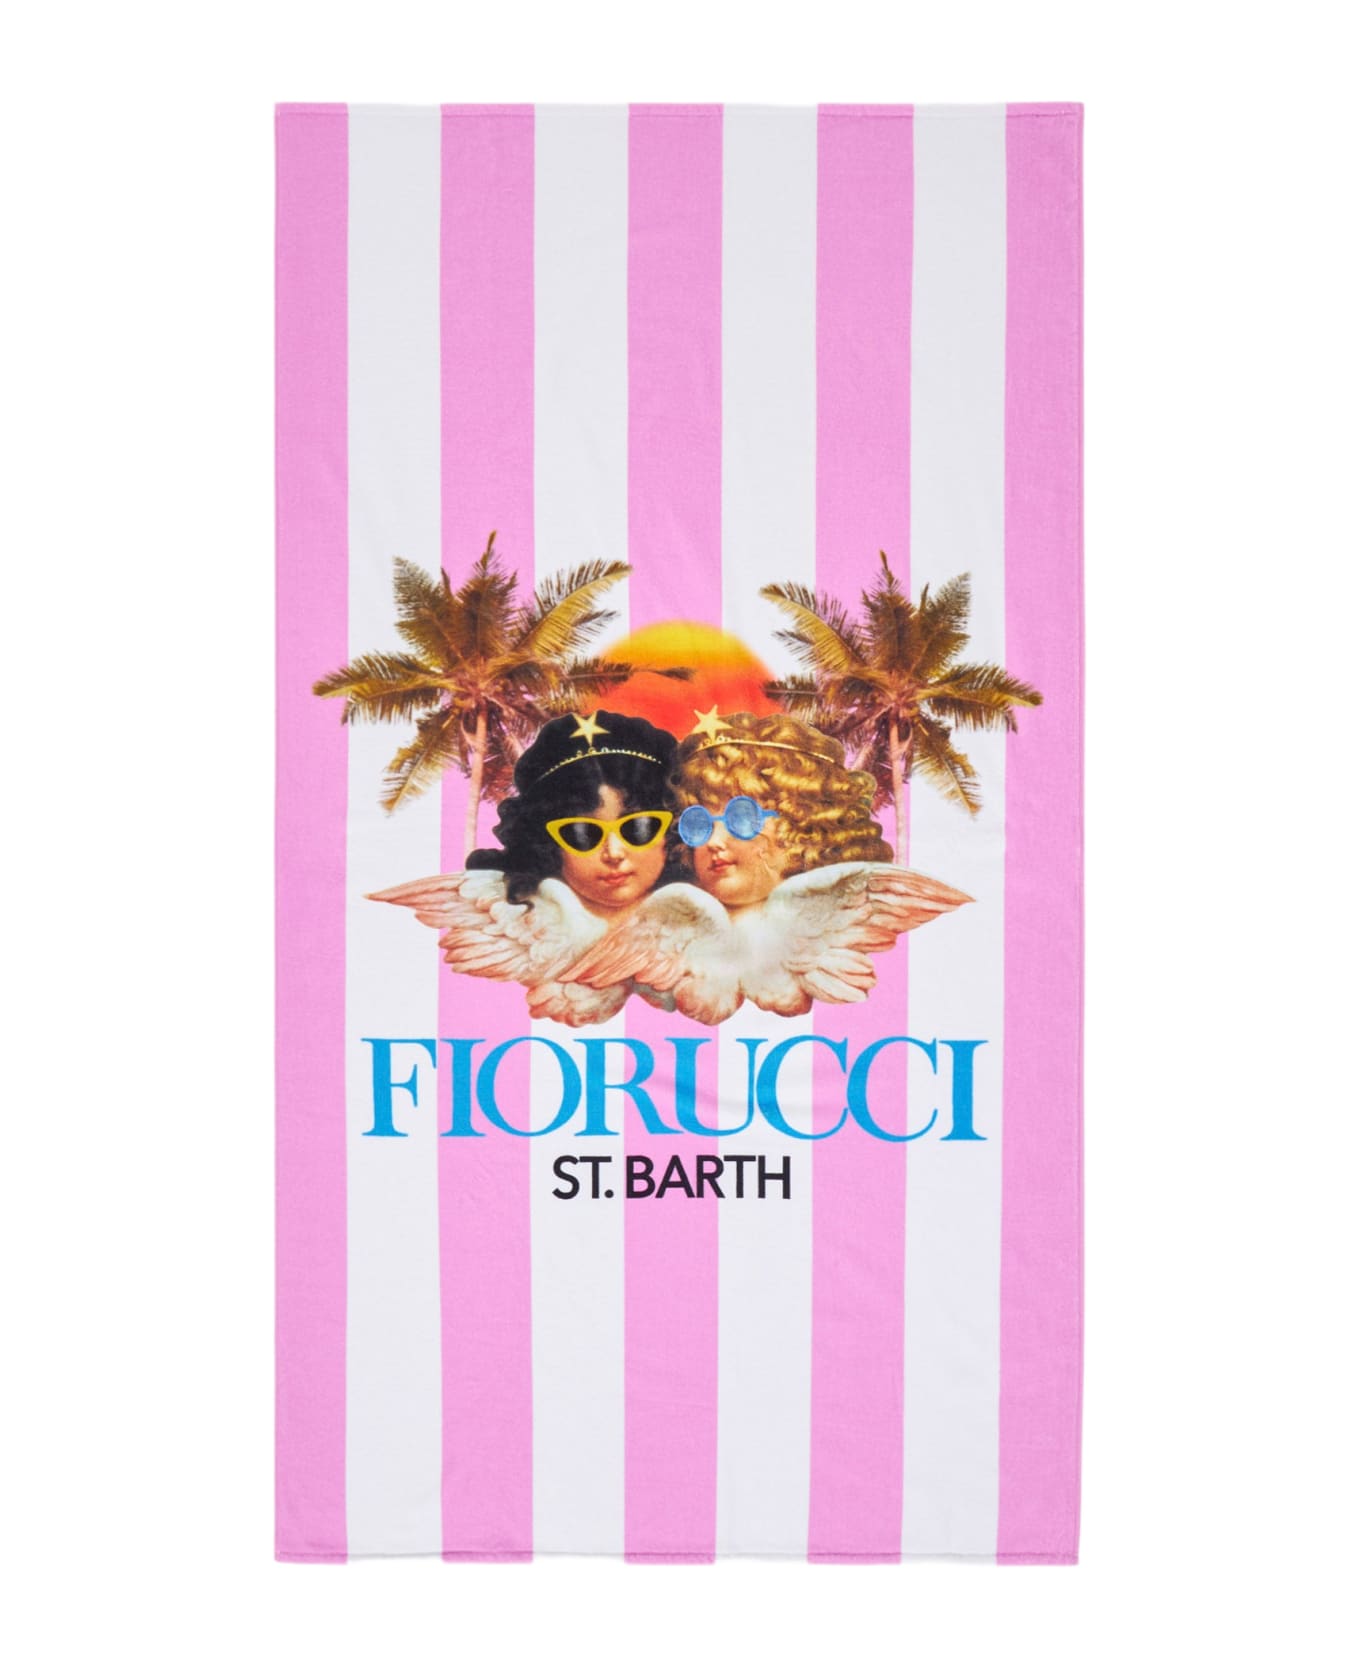 MC2 Saint Barth Soft Terry Beach Towel With Fiorucci Angels Print | Fiorucci Special Edition - PINK